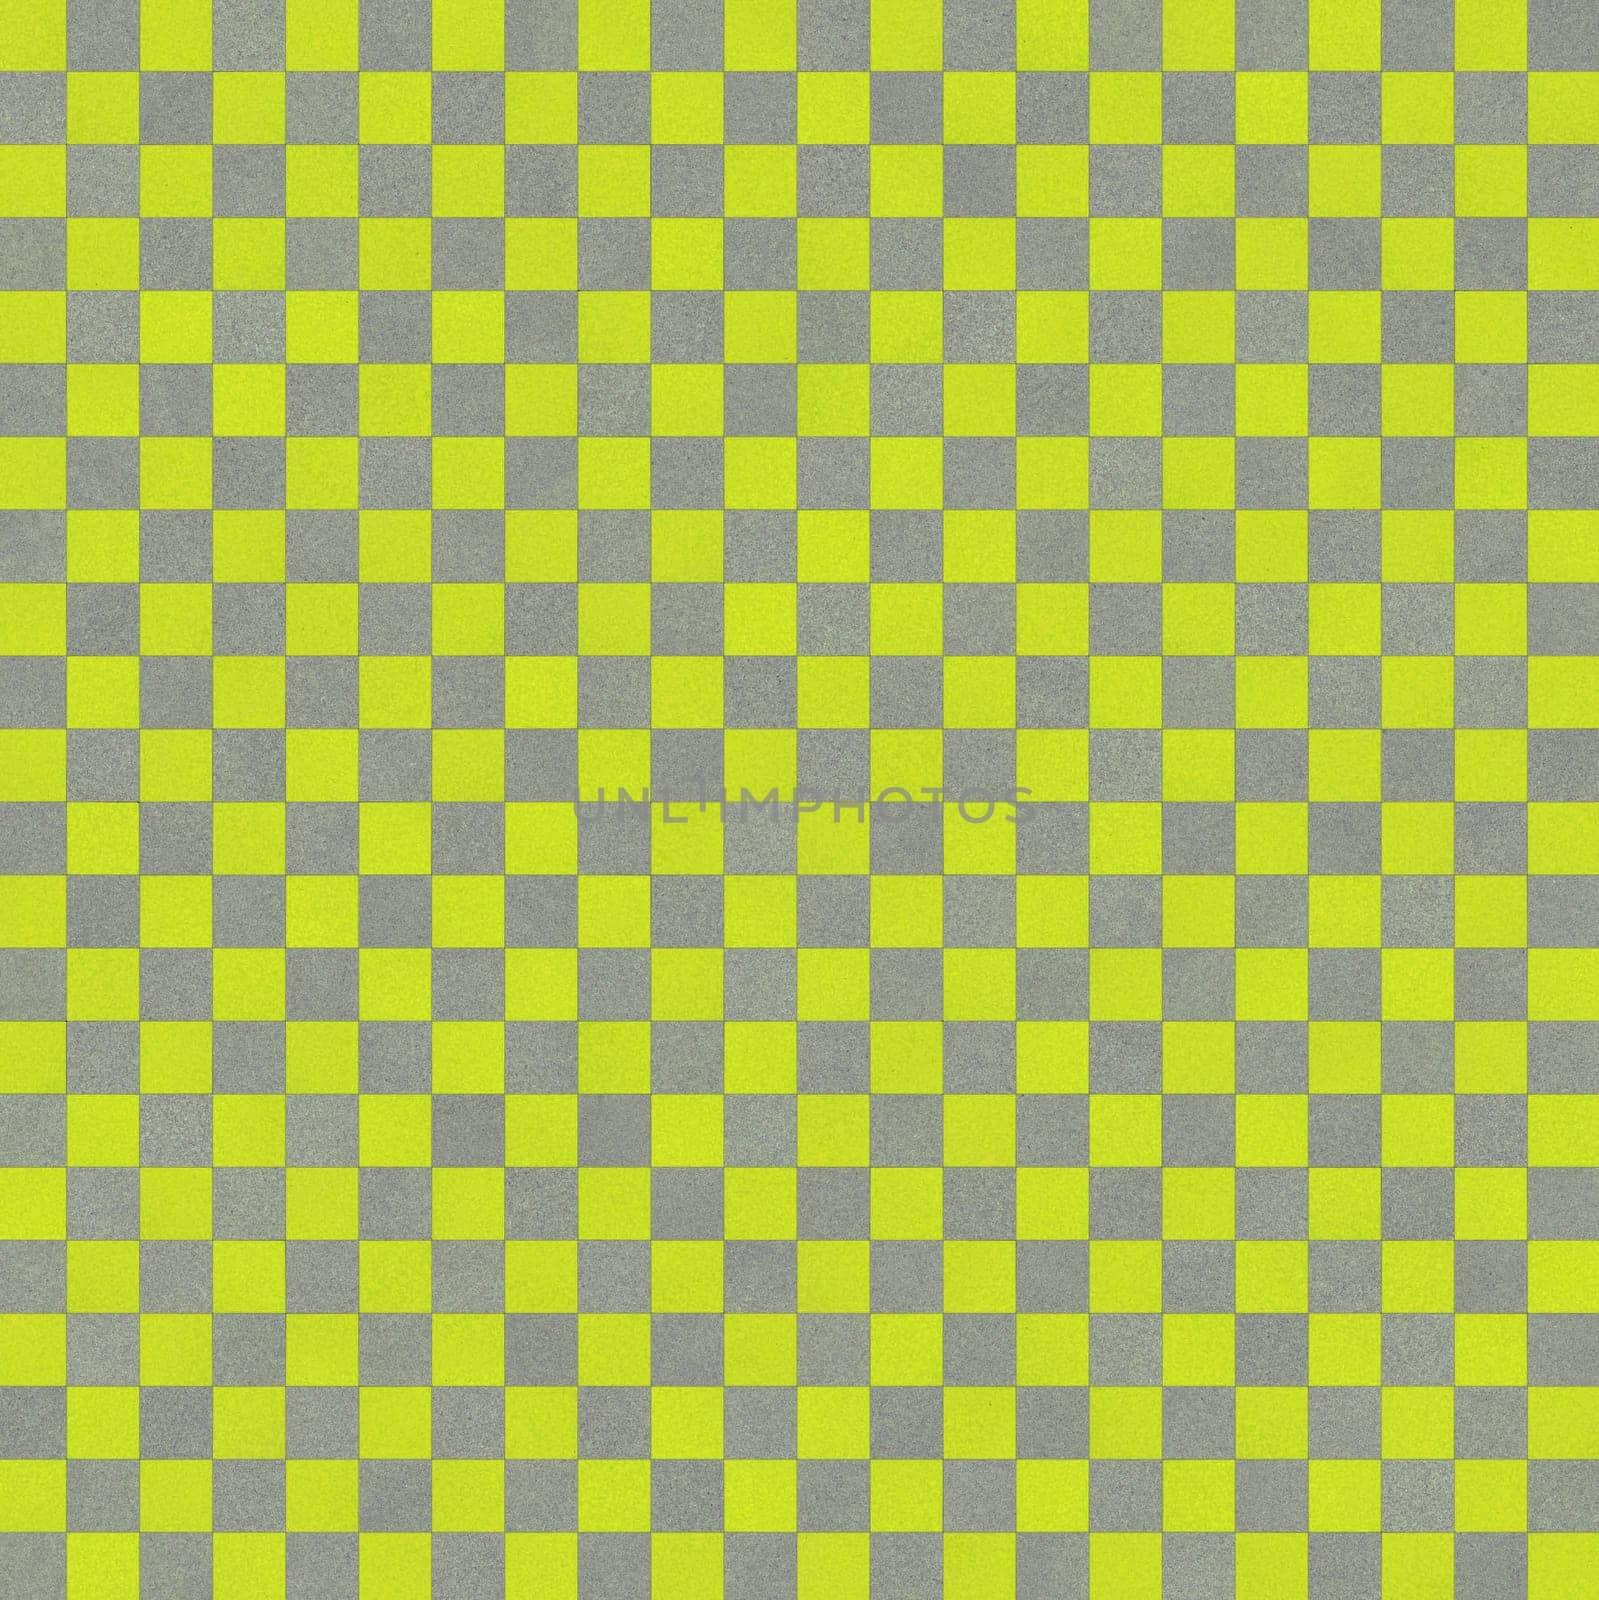 Gray-yellow background of a checkerboard pattern for a close-up design element